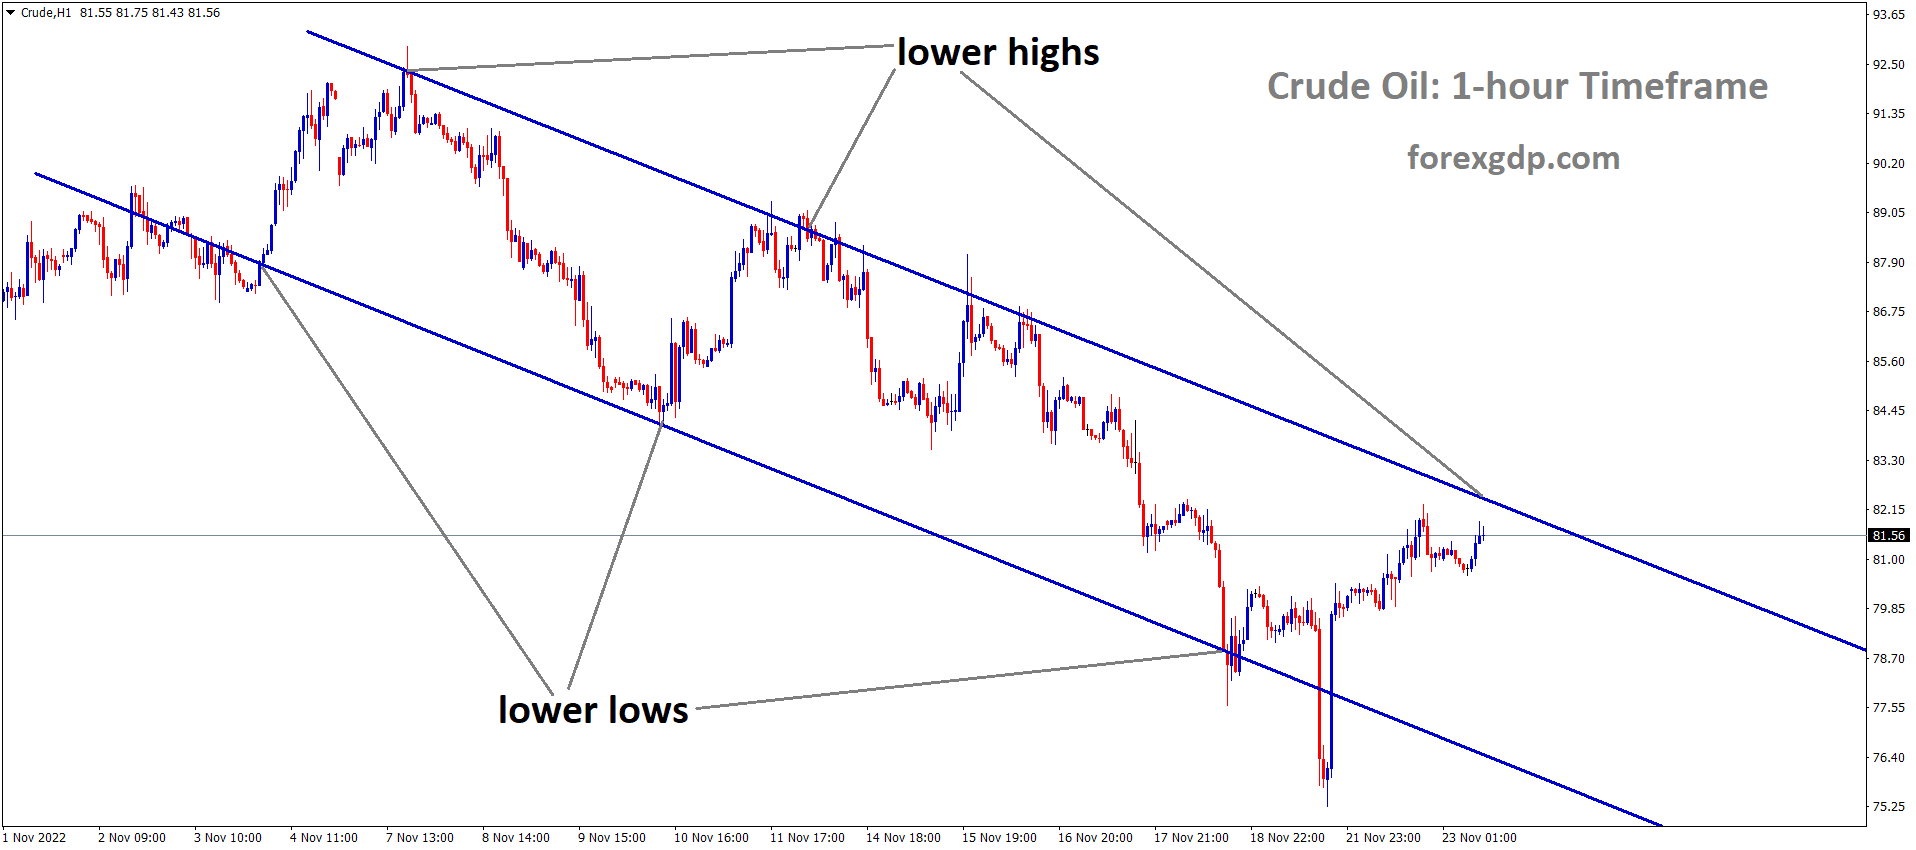 Crude Oil is moving in the Descending channel and the market has reached the lower high area of the channel 2